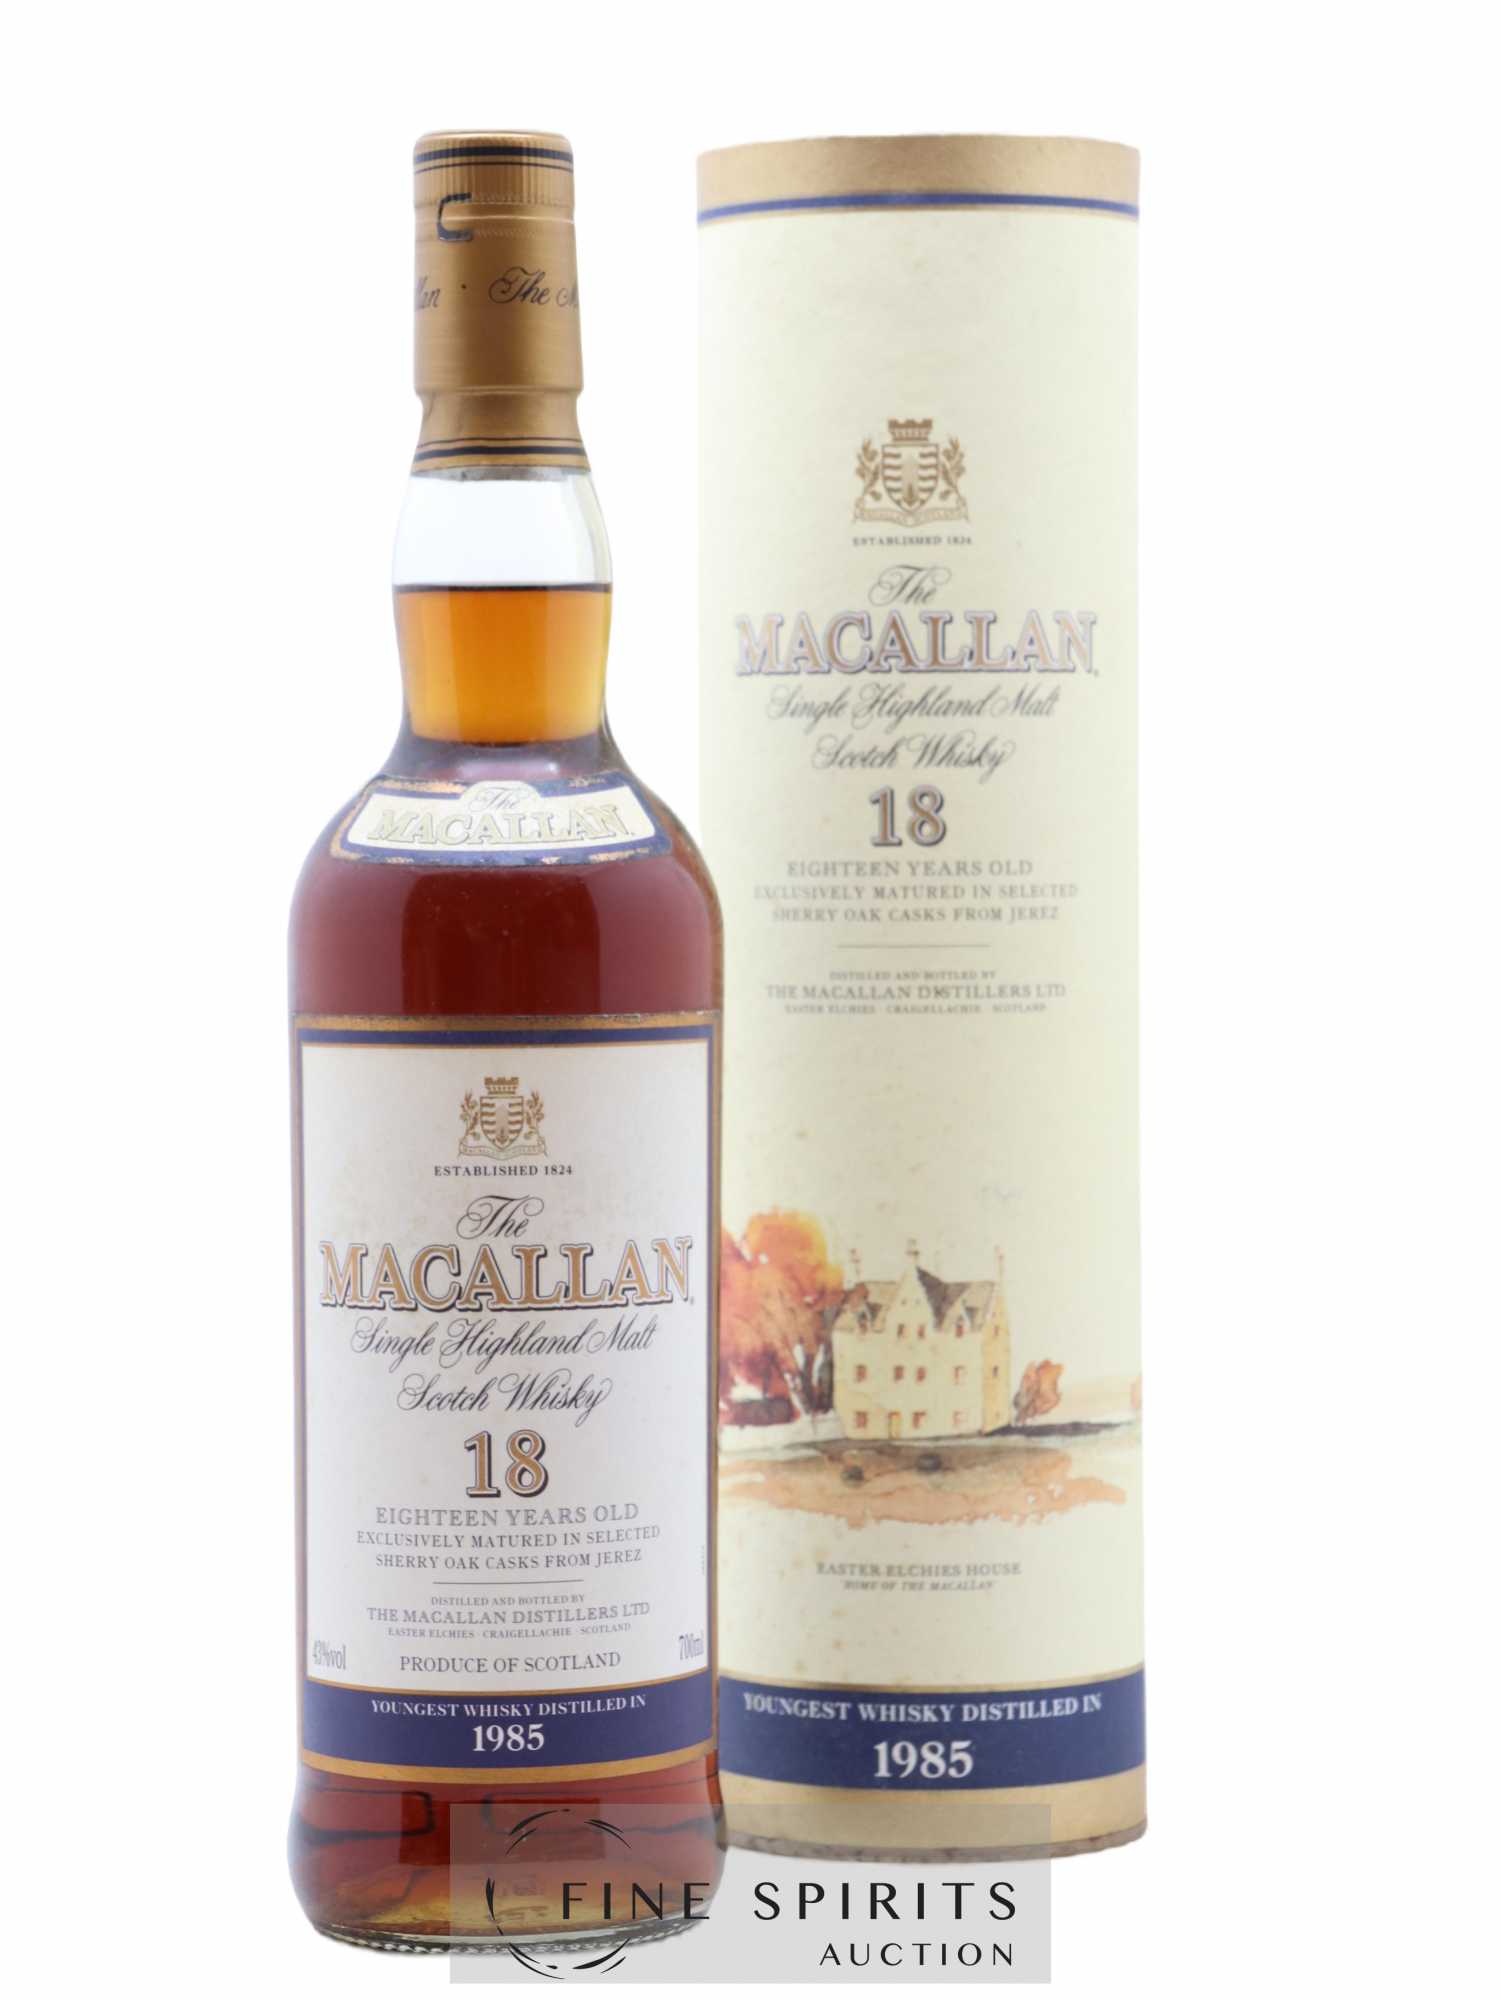 Macallan (The) 18 years 1985 Of. Selected Sherry Oak Casks 